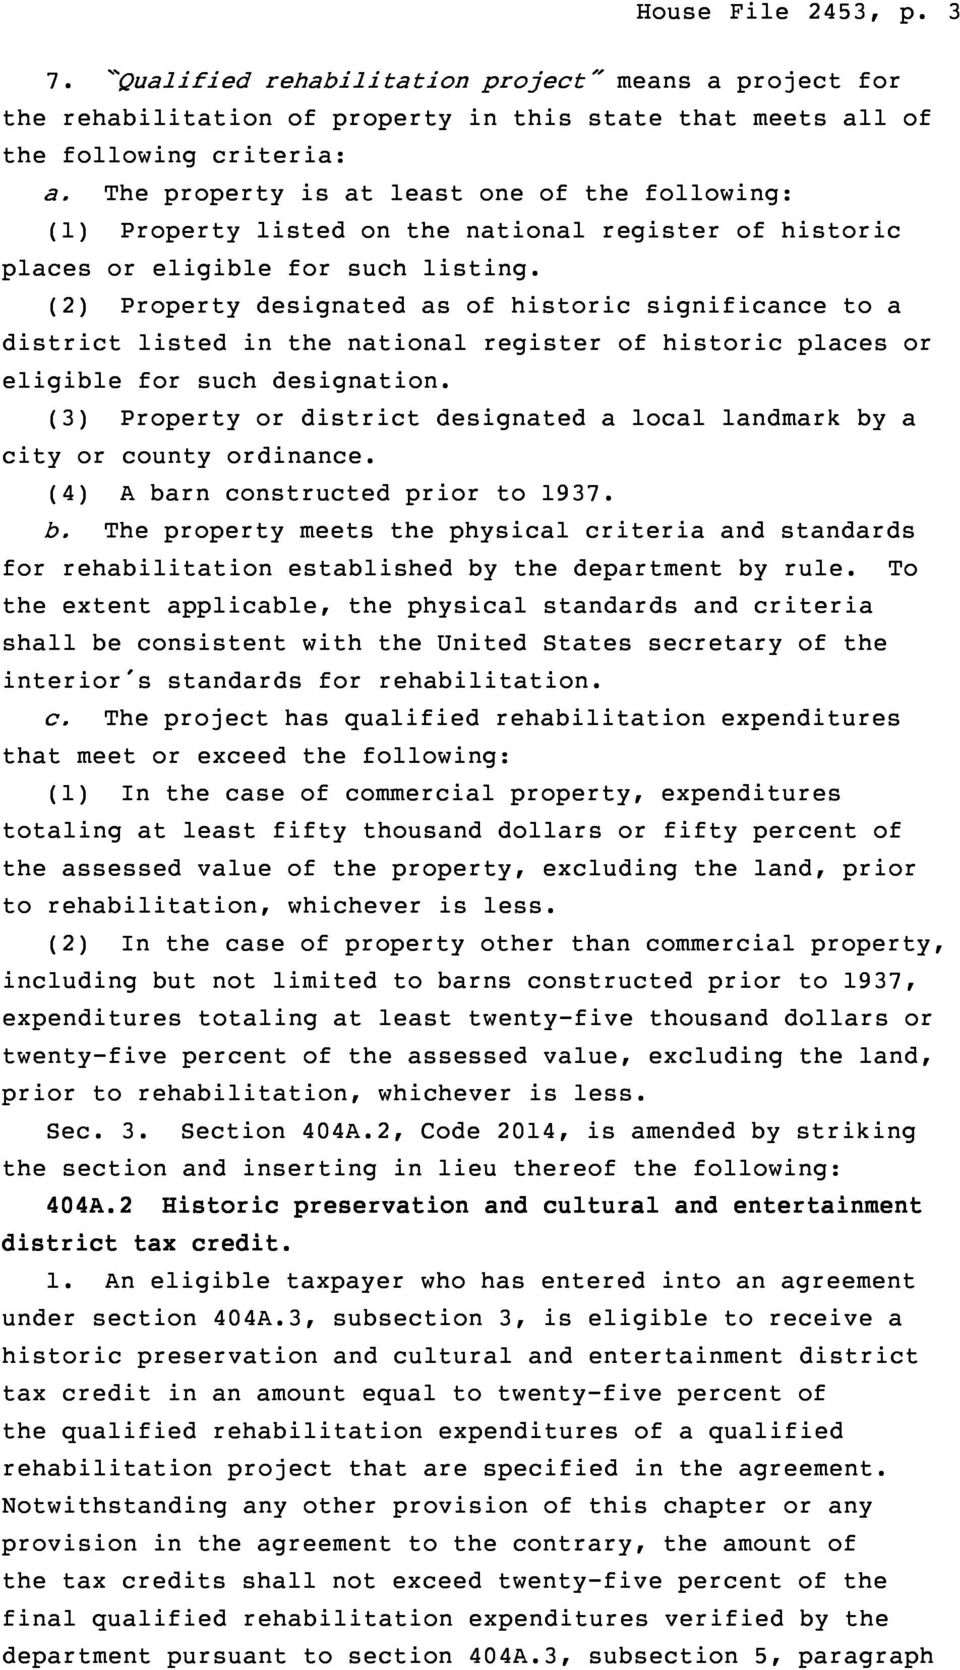 (2) Property designated as of historic significance to a district listed in the national register of historic places or eligible for such designation.